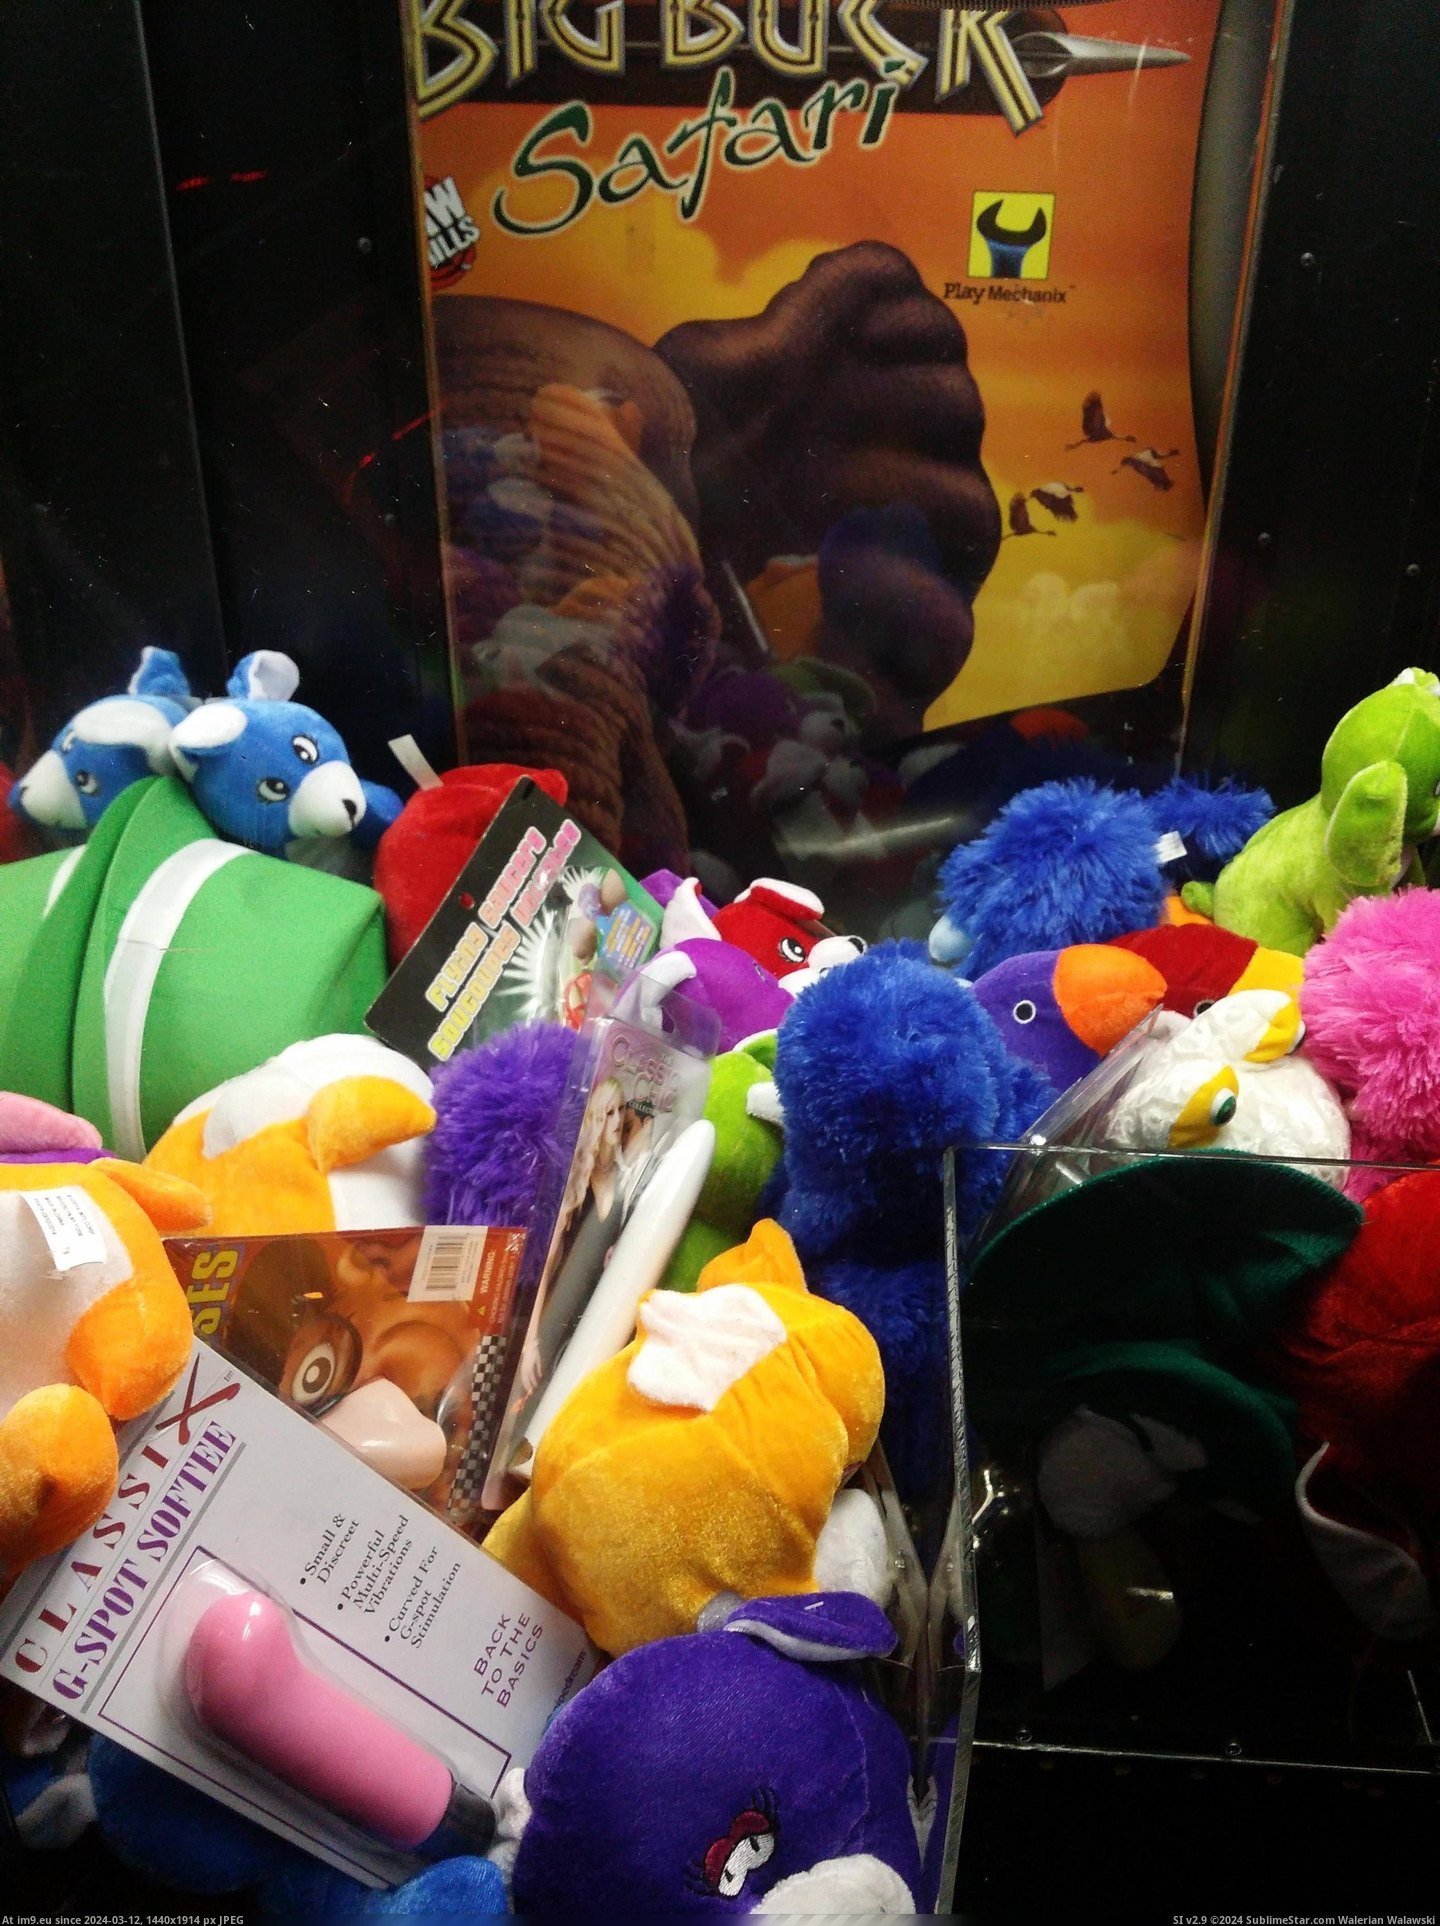 #Wtf #Game #Prizes #Interesting #Crane [Wtf] This crane game has some interesting prizes. Pic. (Image of album My r/WTF favs))